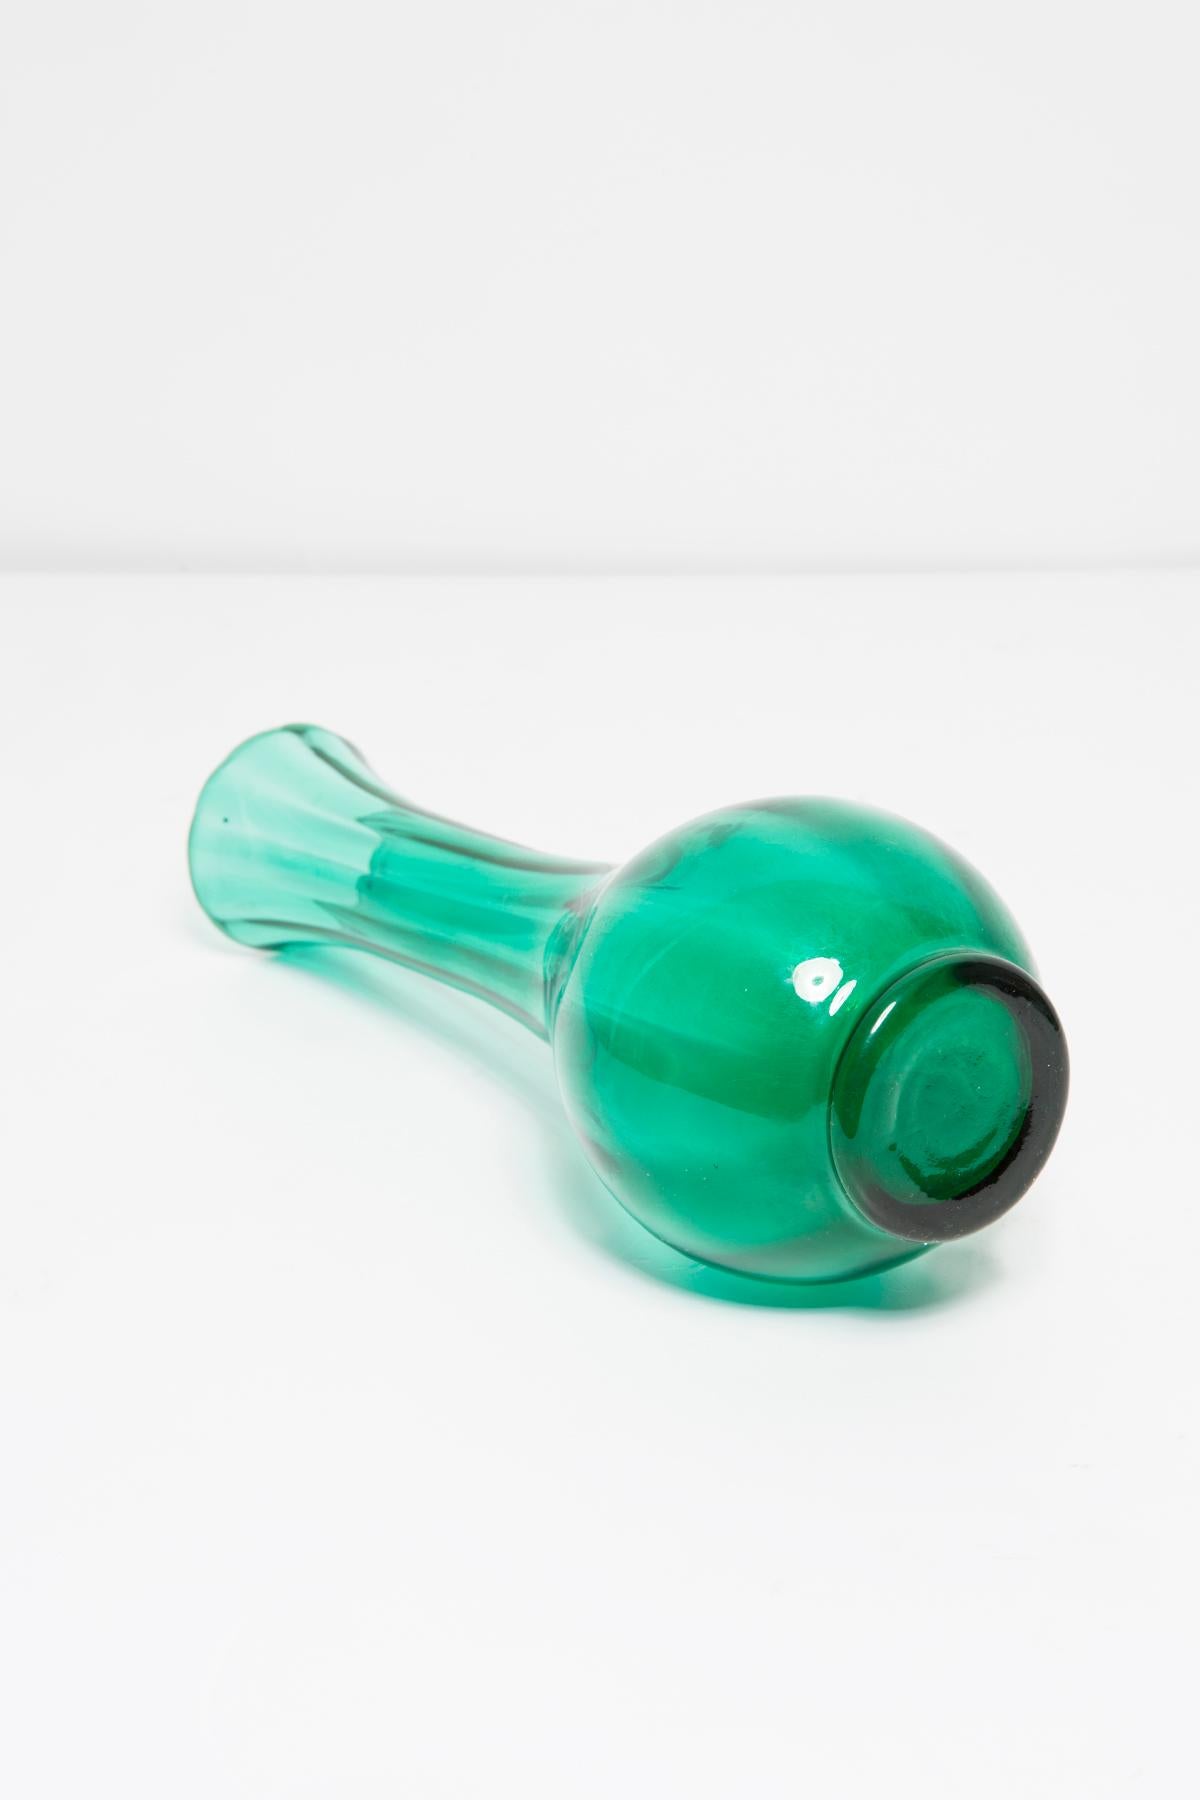 Mid Century Vintage Artistic Glass Green Vase, Europe, 1970s For Sale 4